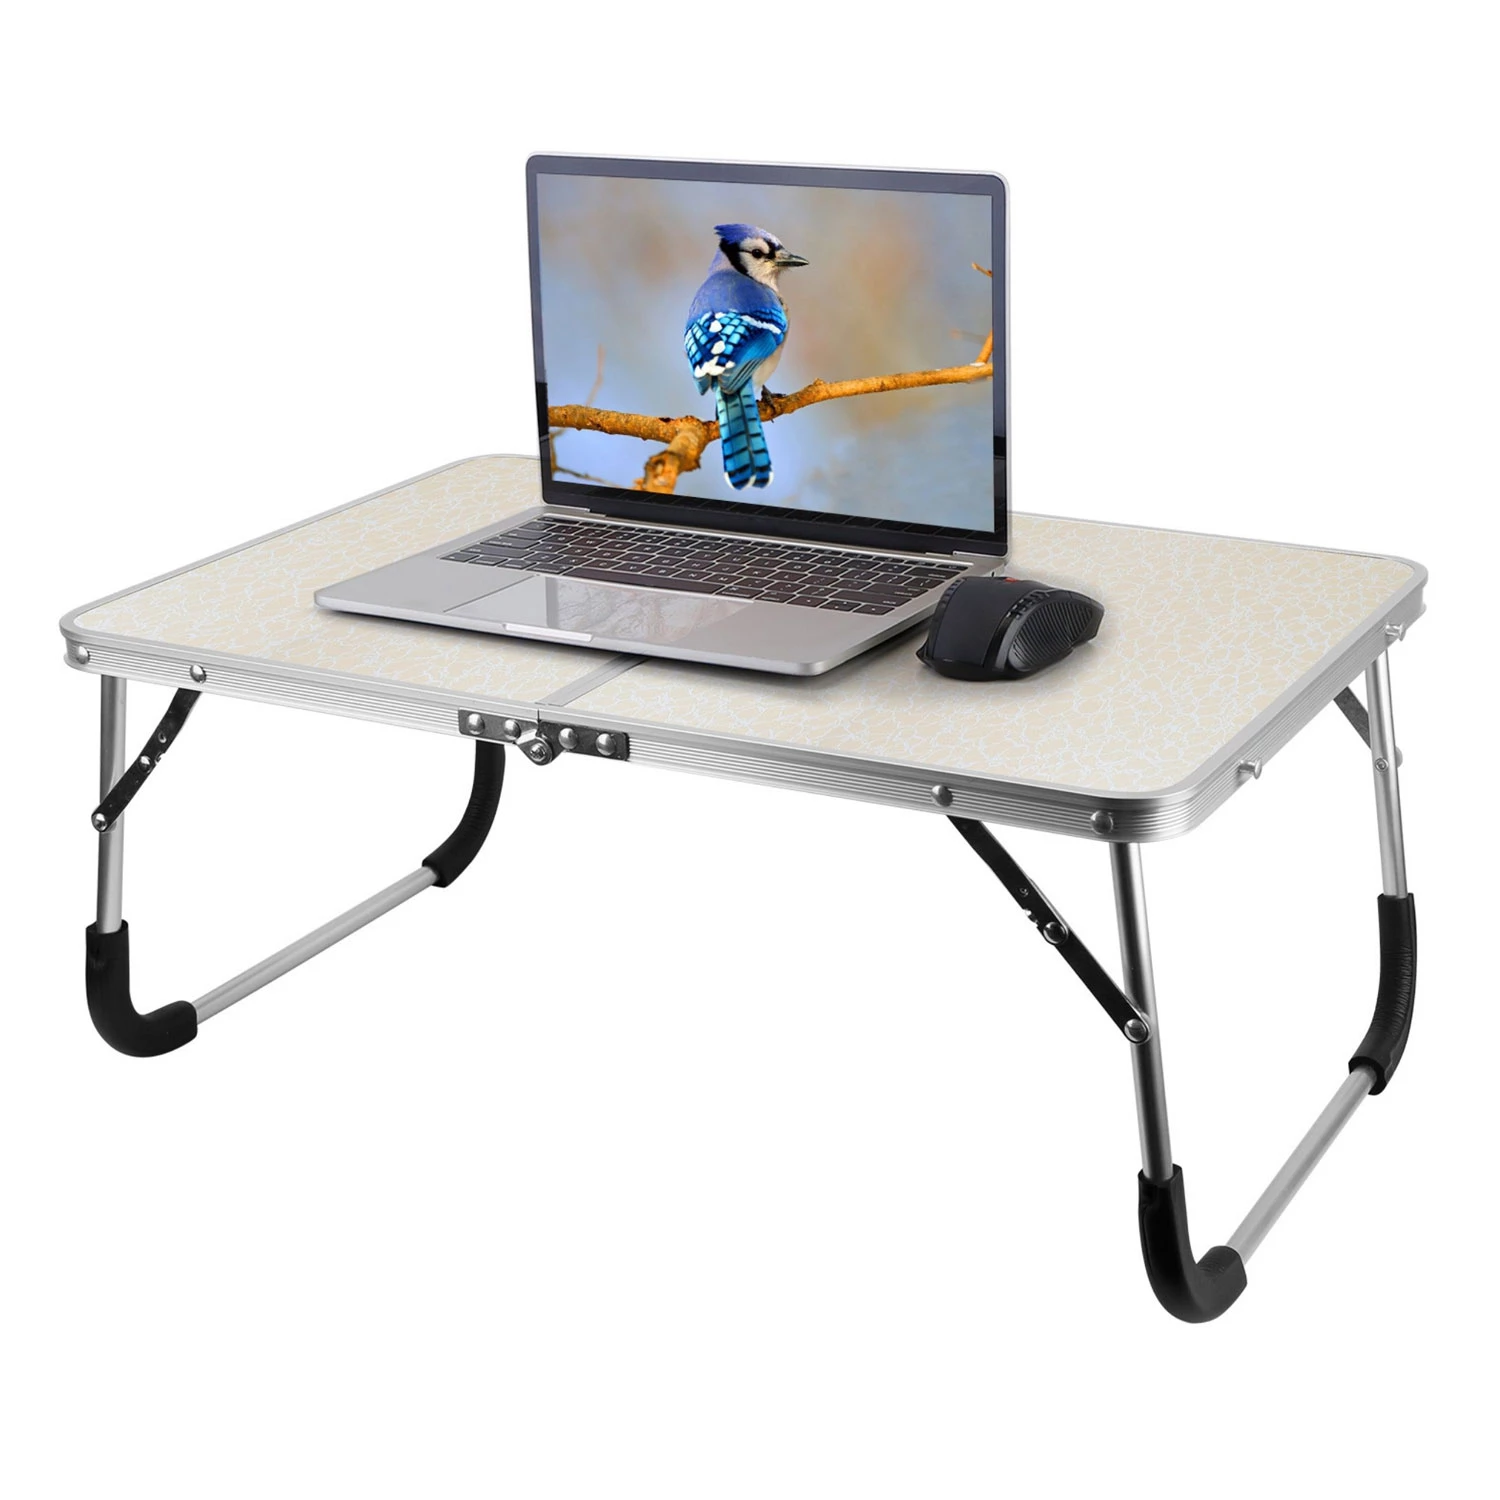 Foldable Laptop Table Notebook Bed Desk Lap Tray - For Sofa, Couch, Floor, Dorm